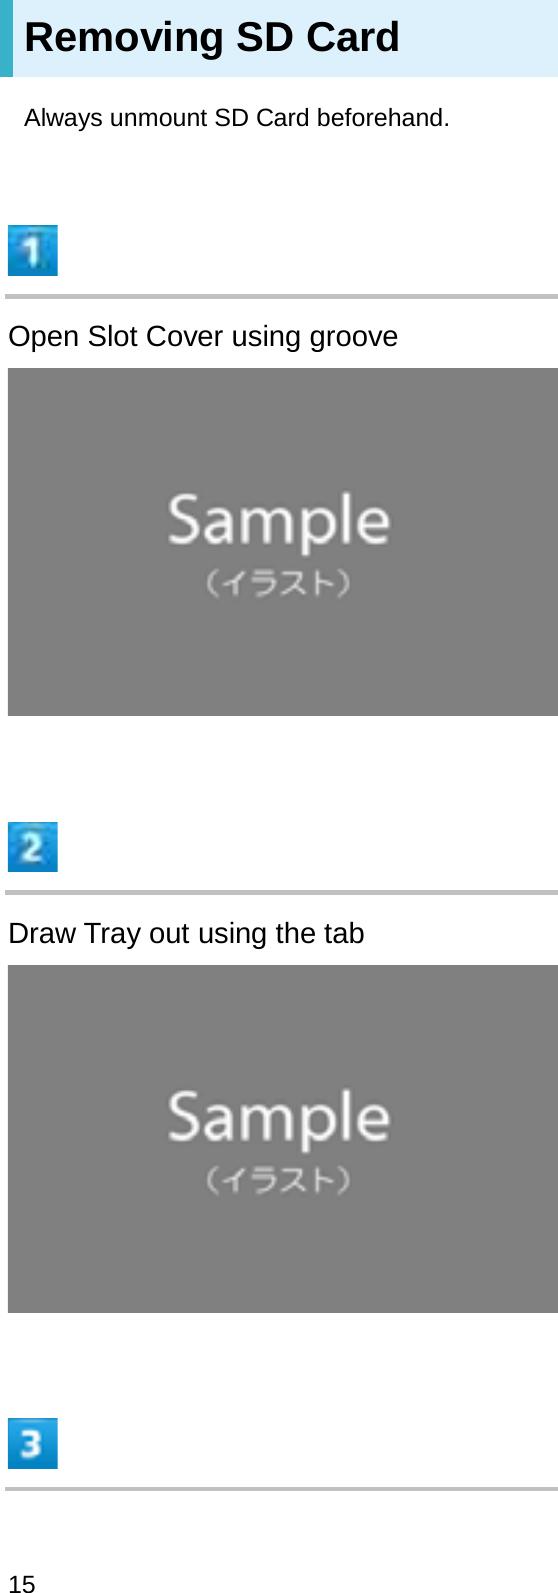 Removing SD CardAlways unmount SD Card beforehand.Open Slot Cover using grooveDraw Tray out using the tab15